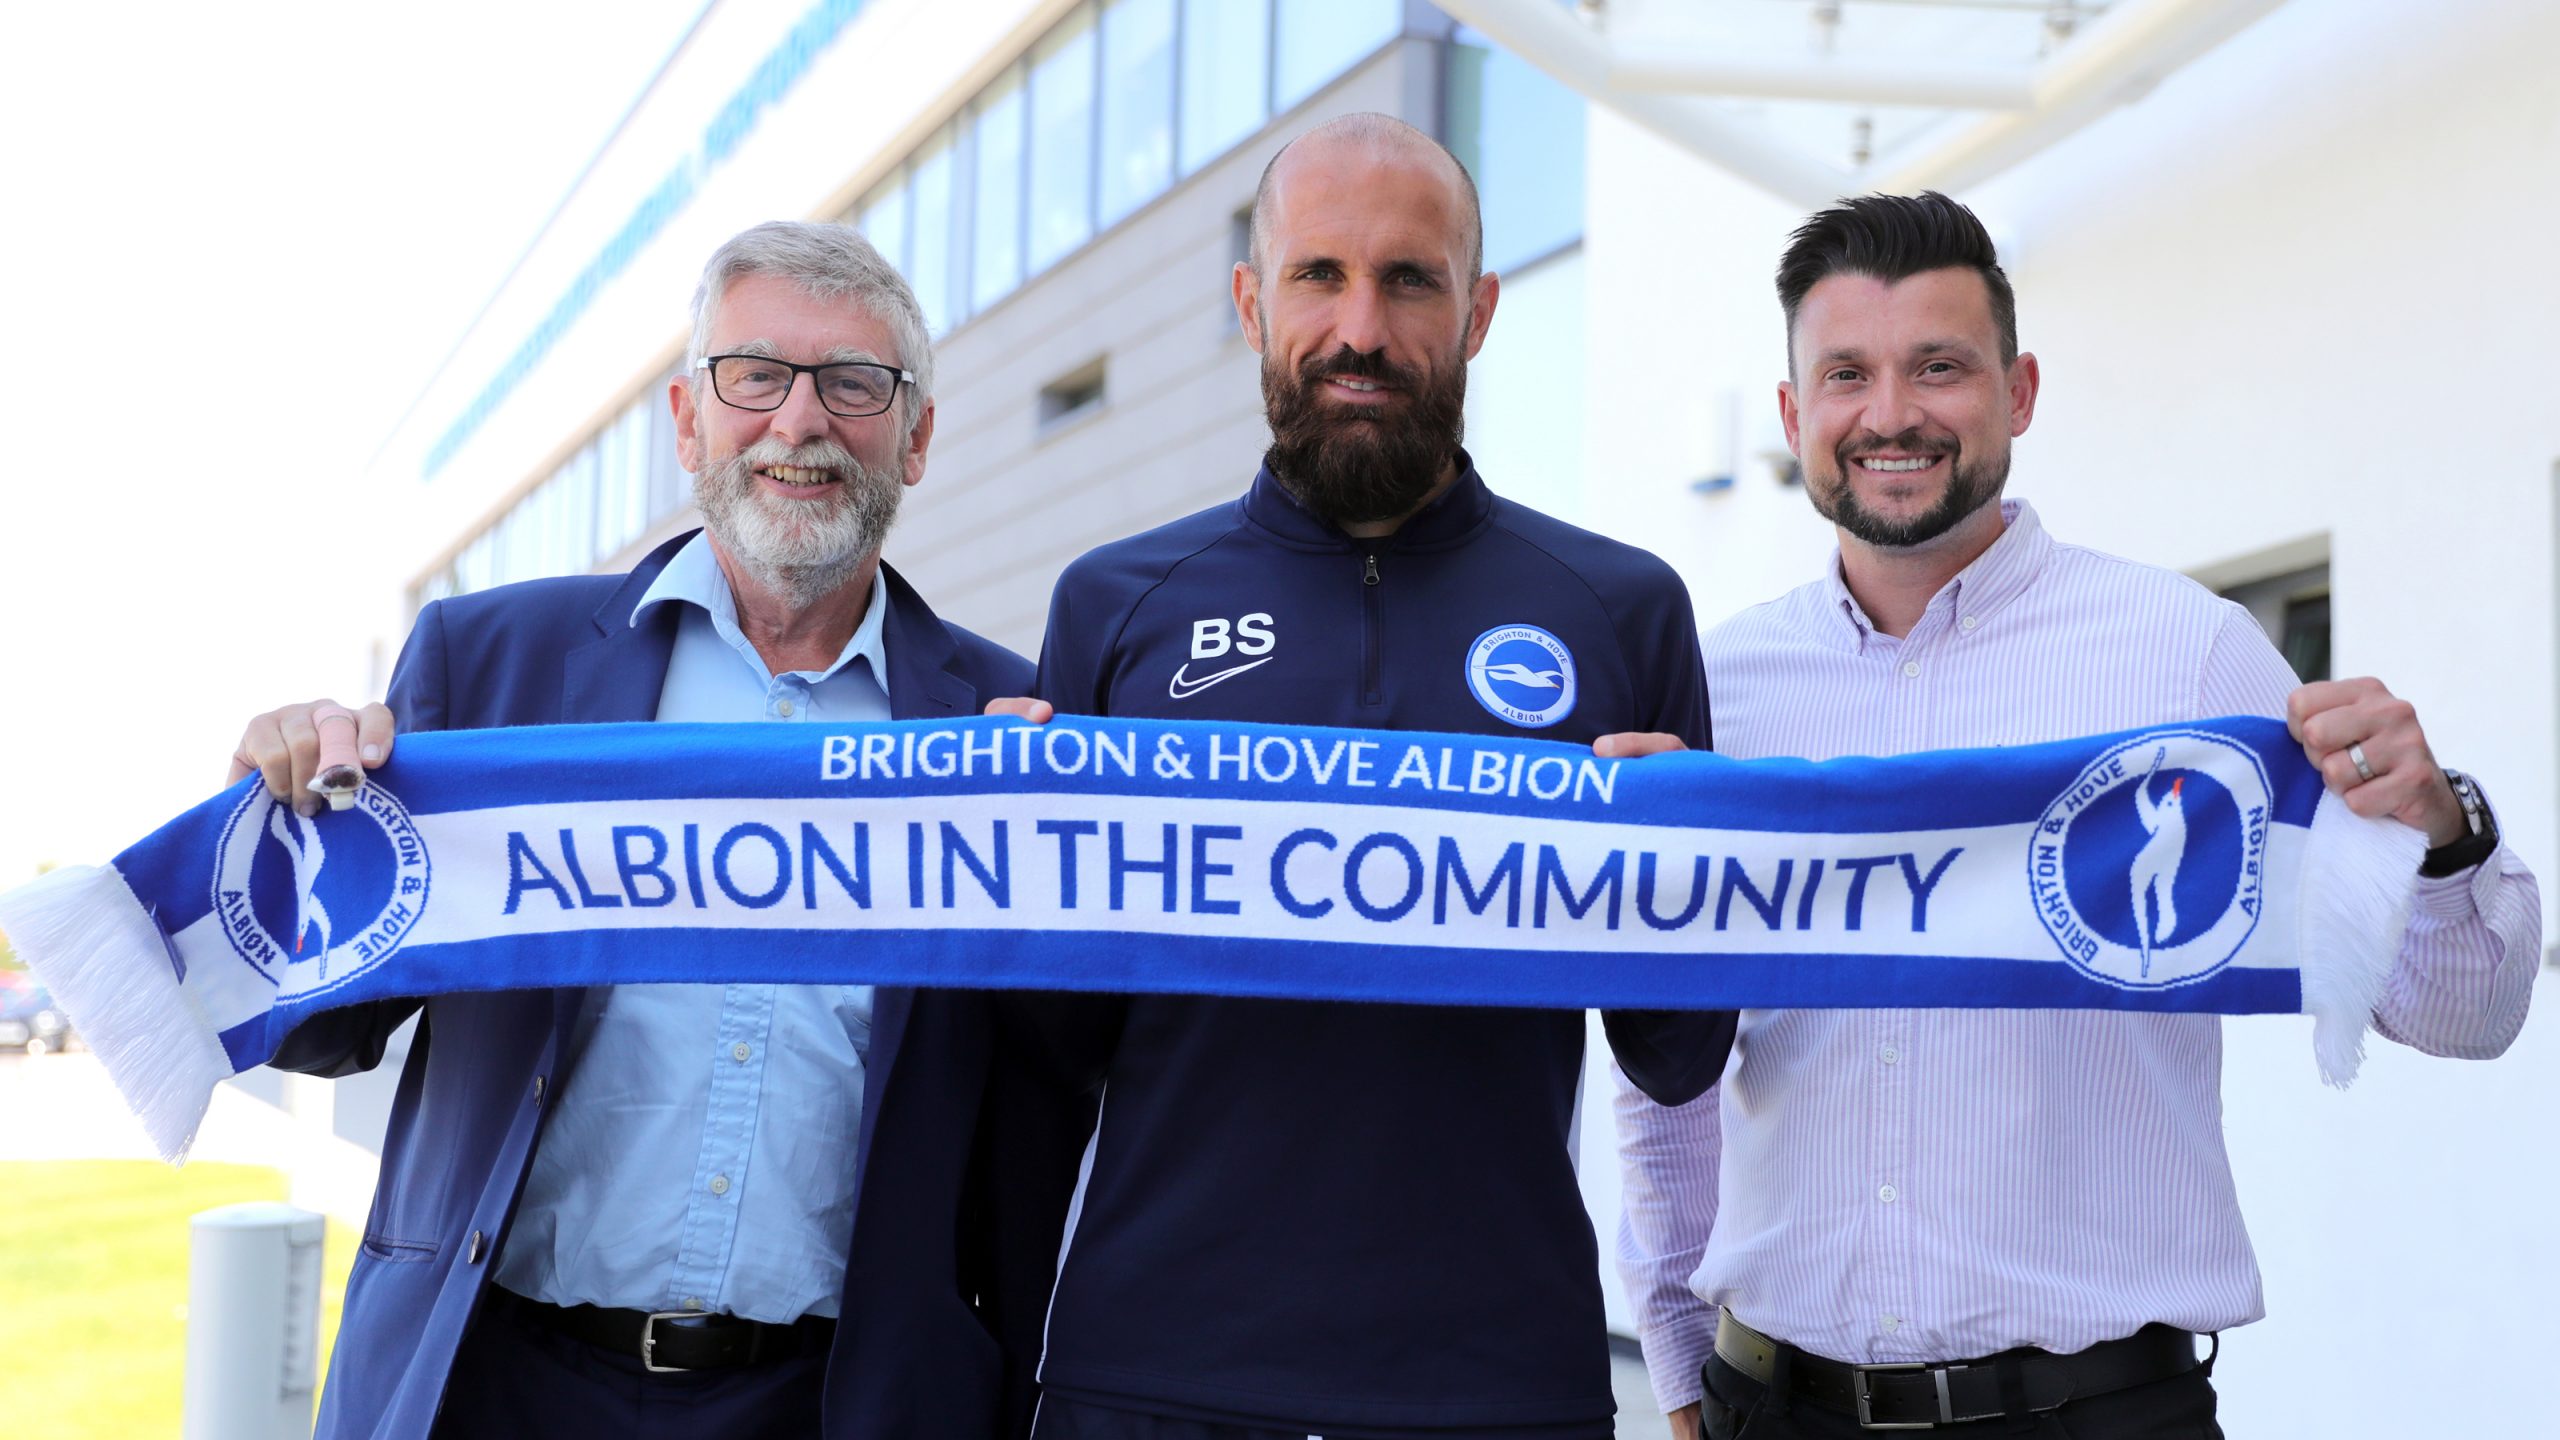 Bruno appointed official patron of Albion in the Community